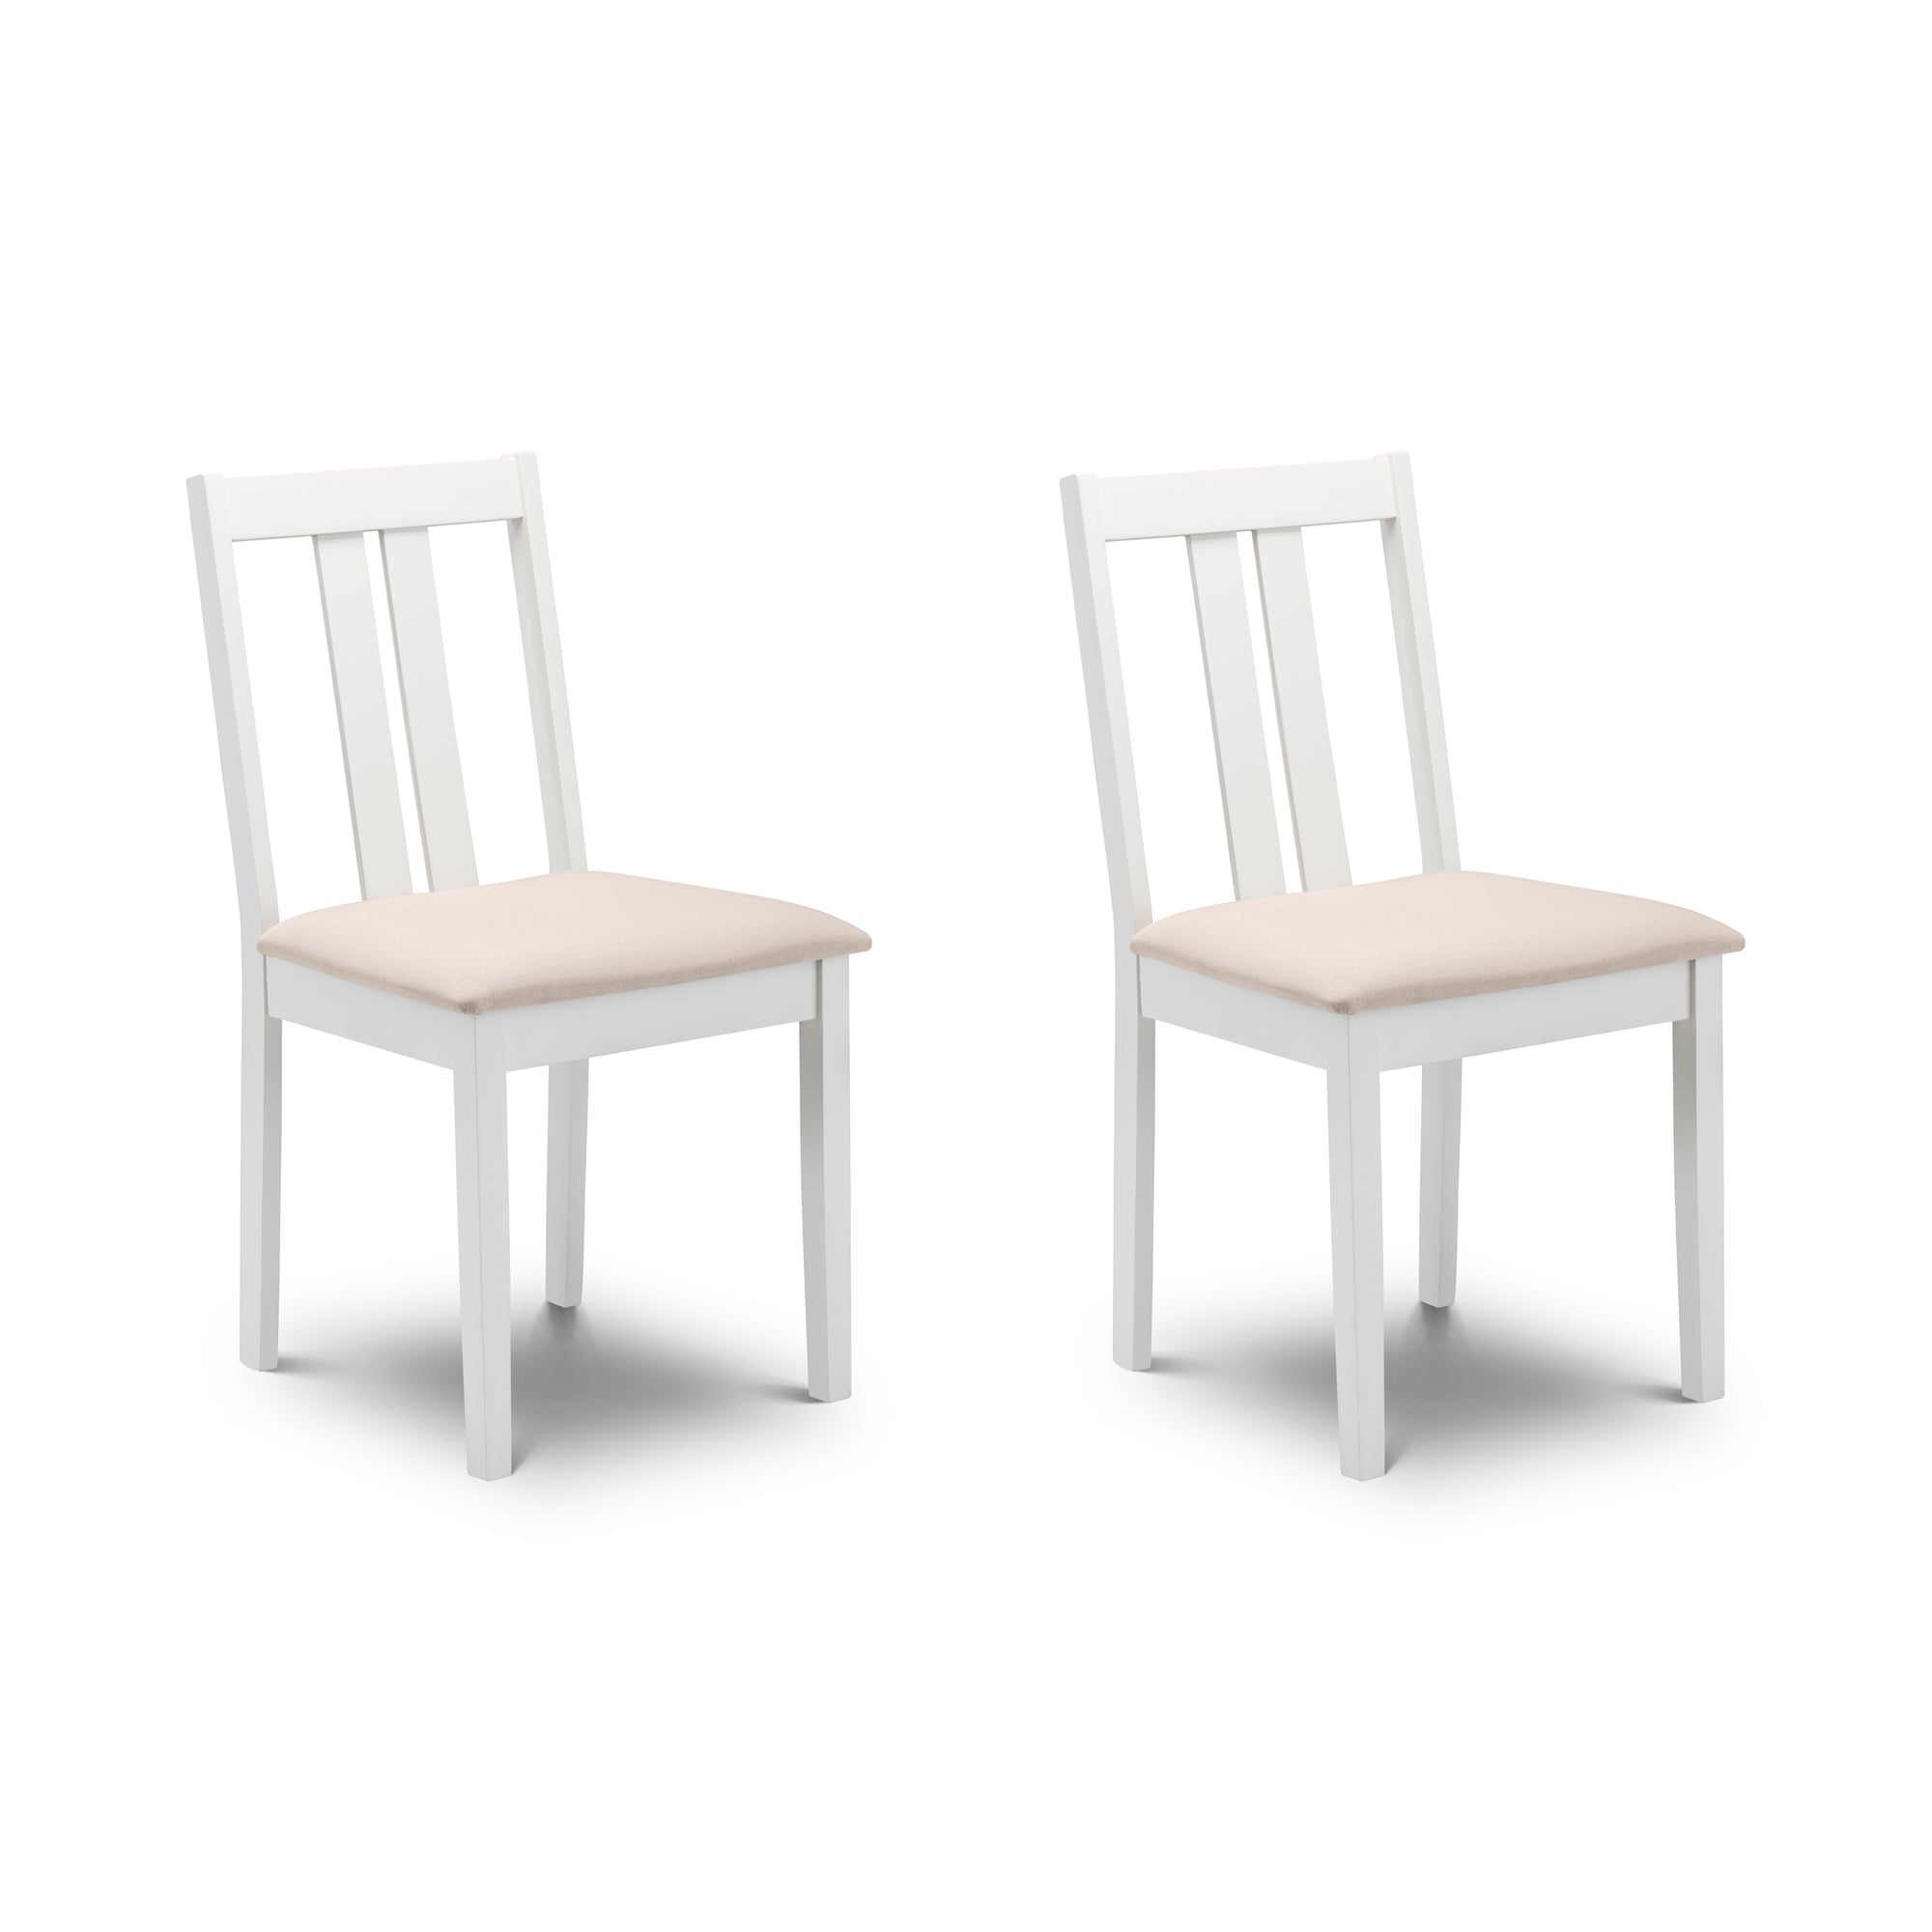 Rufford Set Of 2 Dining Chairs Cream